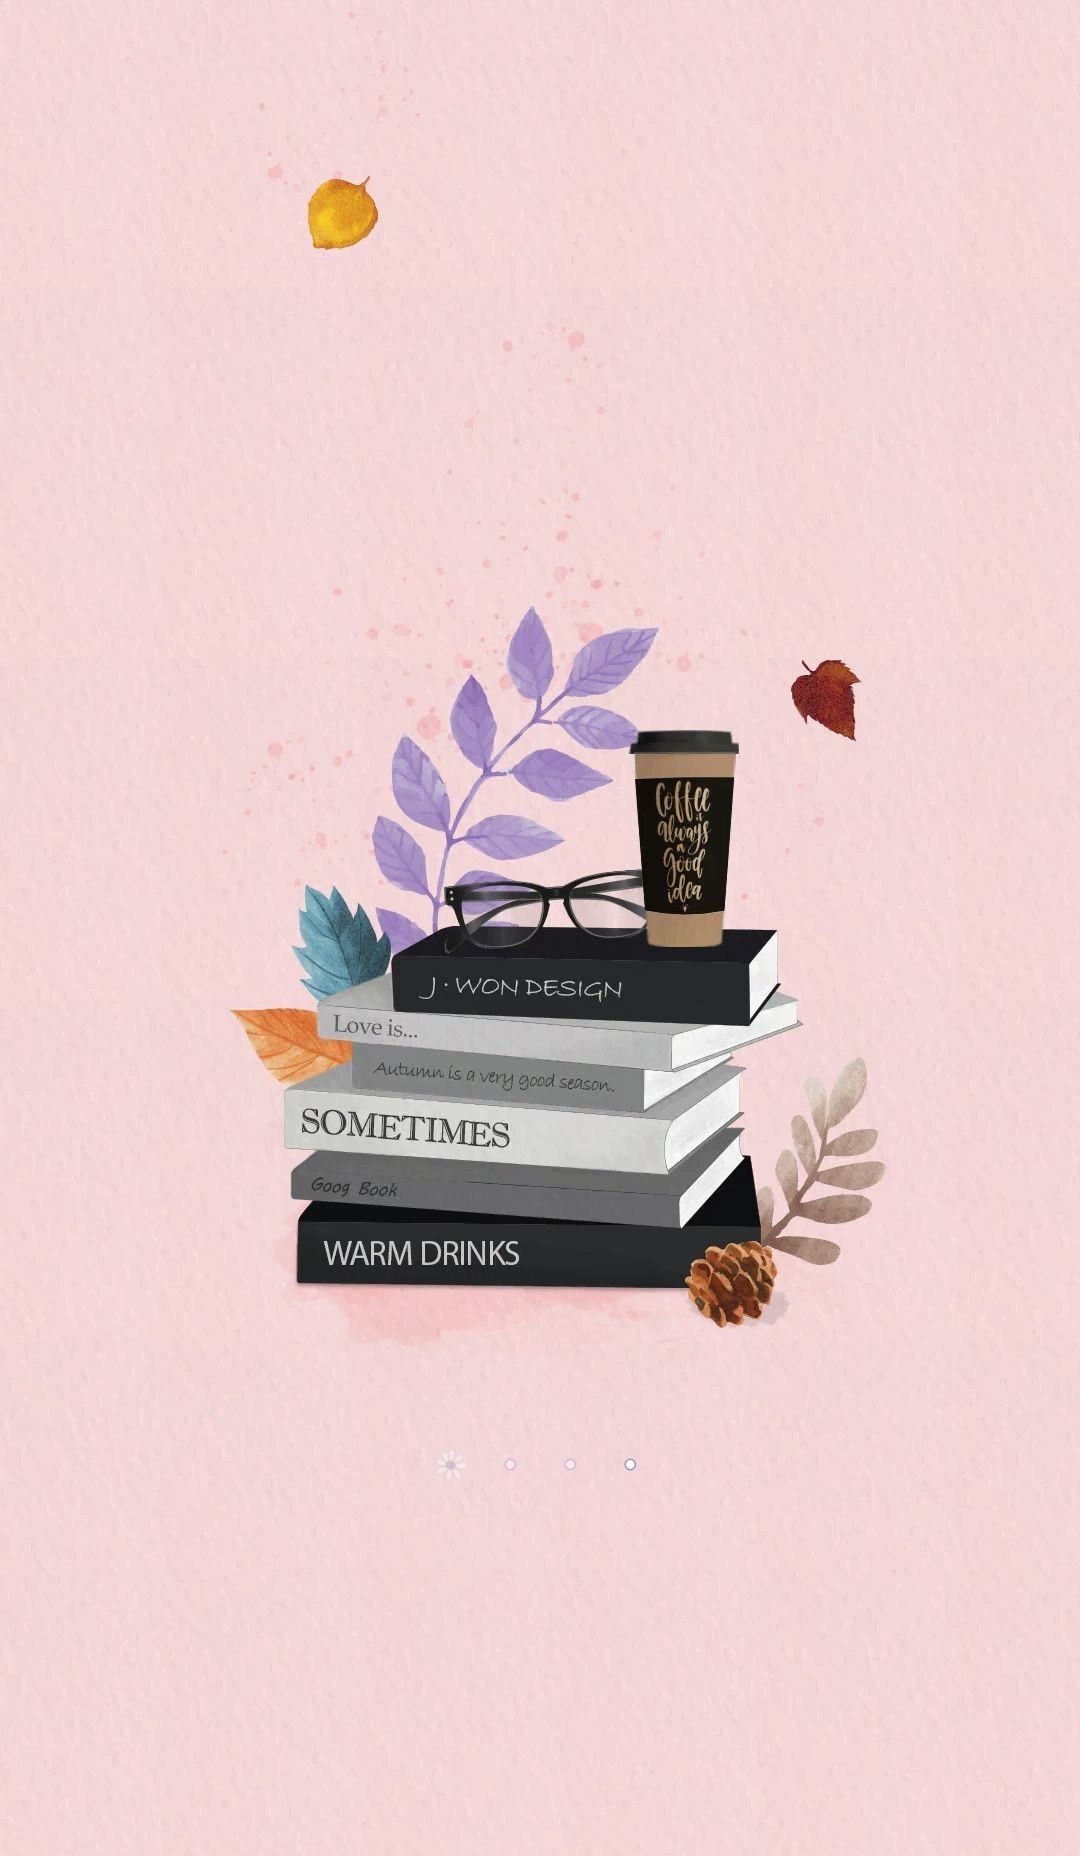 IPhone wallpaper with a stack of books, a cup of coffee, and a pair of glasses. - Books, warm